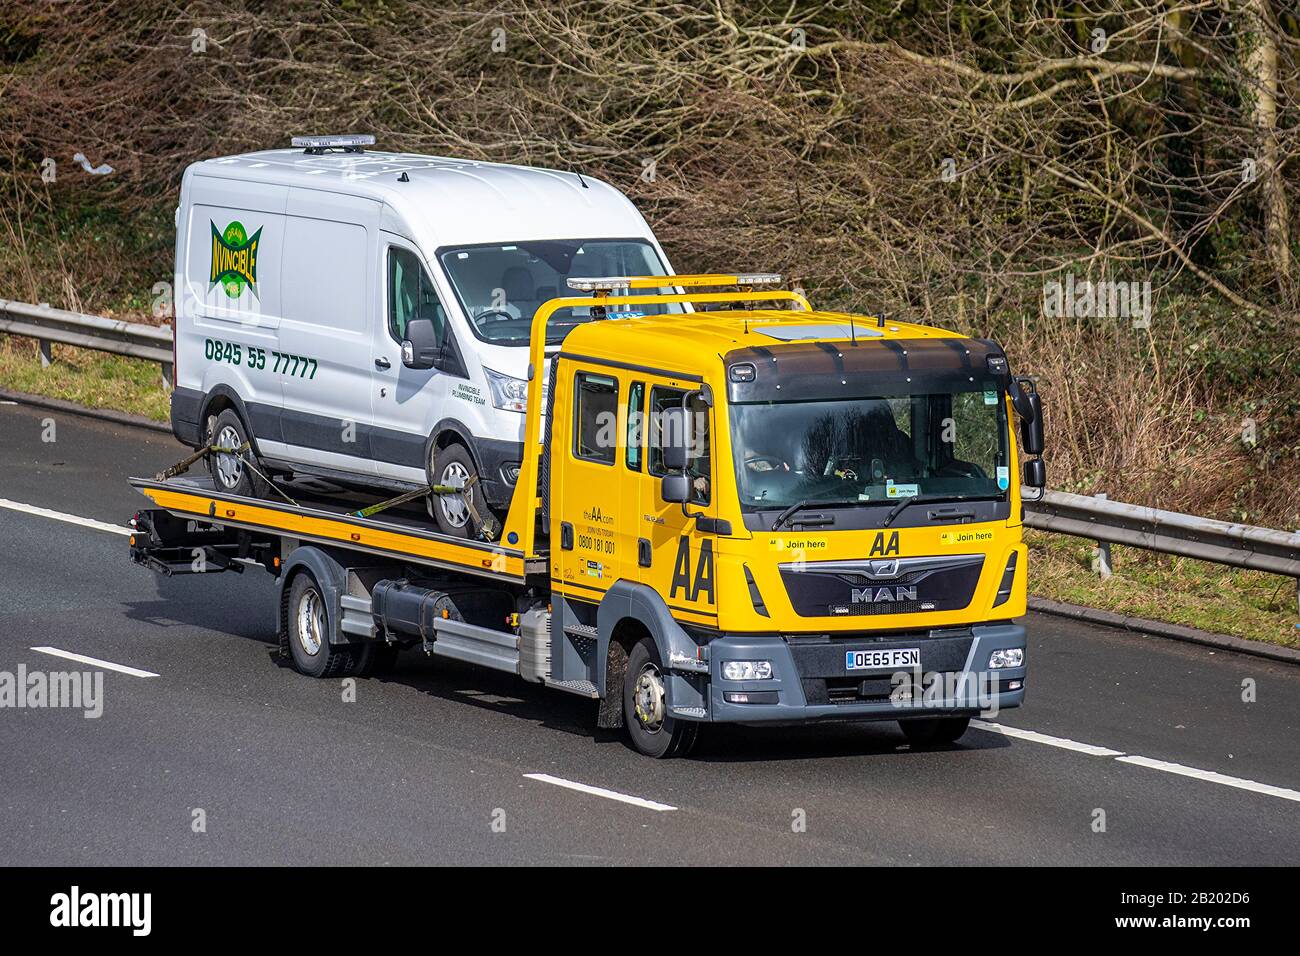 AA Van yellow recovery truck carrying broken down van; Side view of MAN rescue breakdown 24hr recovery vehicle transporting commercial vehicle on M6, Lancaster, UK; Vehicular traffic, transport, modern, north-bound on the 3 lane highway. Stock Photo